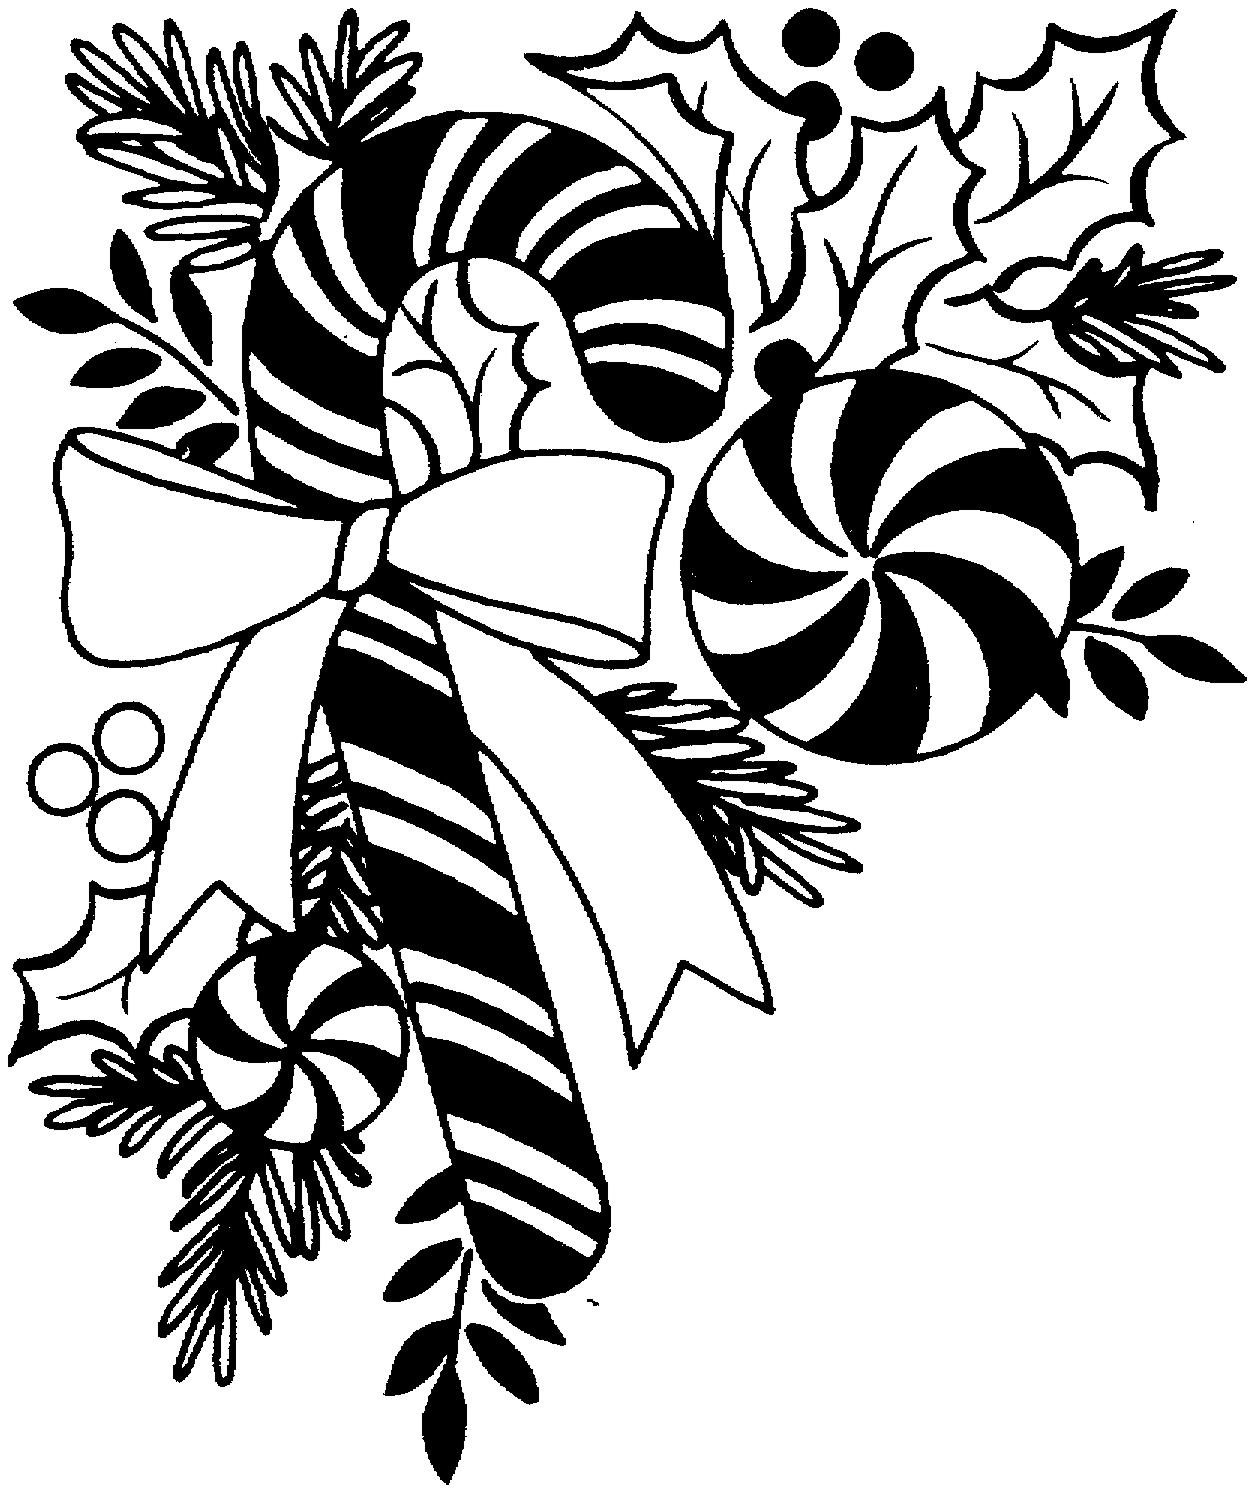 Black And White Christmas Borders Cliparts.co